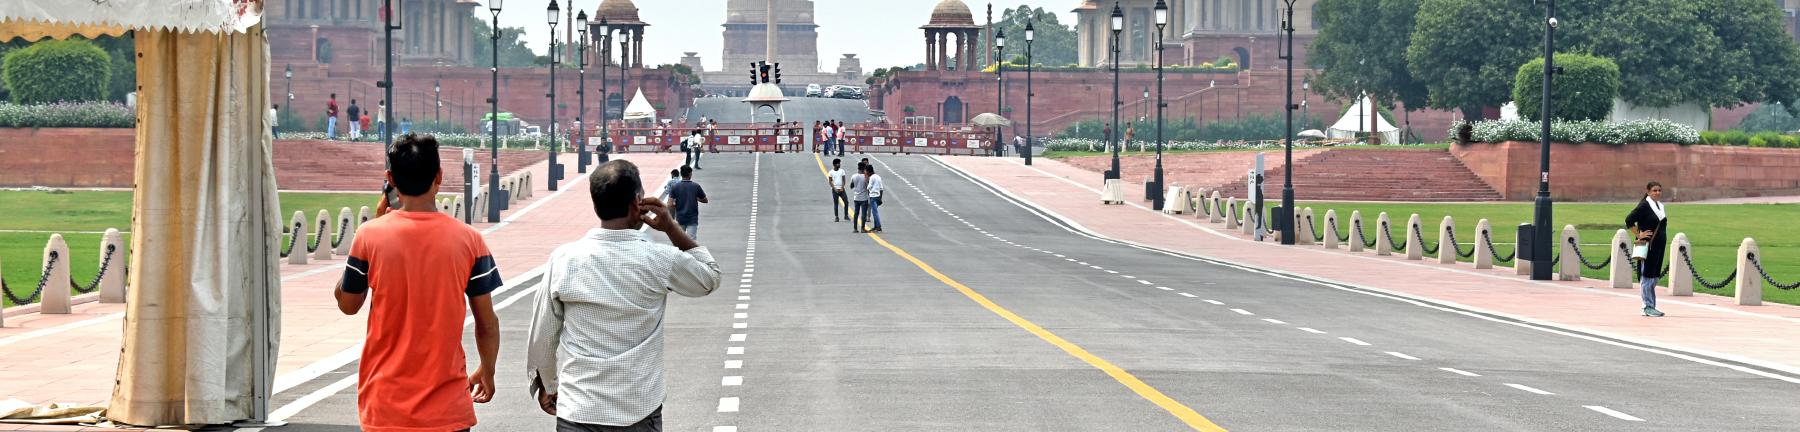 People walk on the path leading to the President's estate, New Delhi, India.